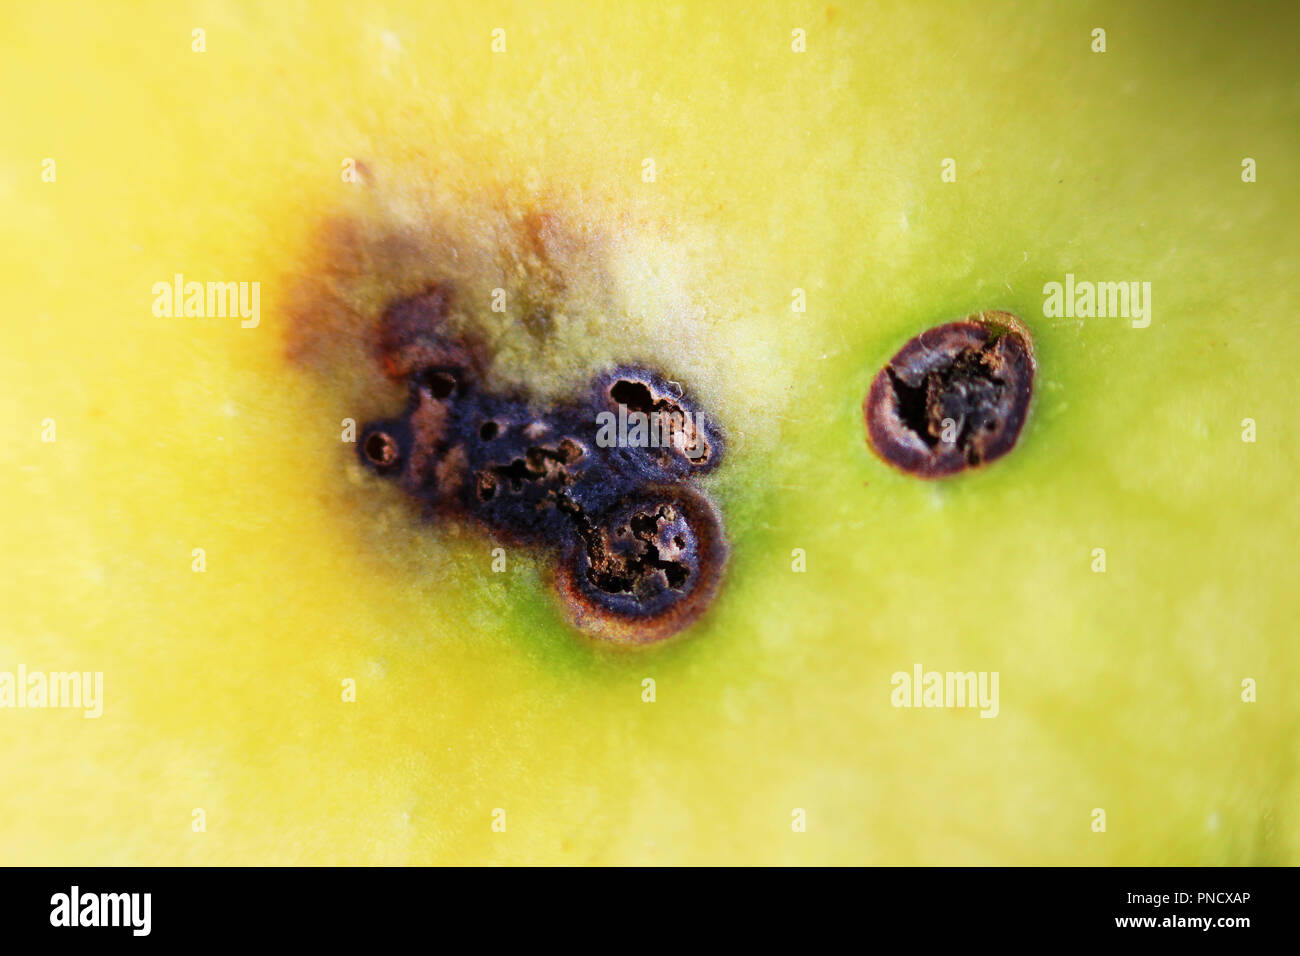 a trace of apple worms on the skin. macro photography. source of infection of apple by the Brown rot Monilia fructigena mold on the skin of a rotting Stock Photo